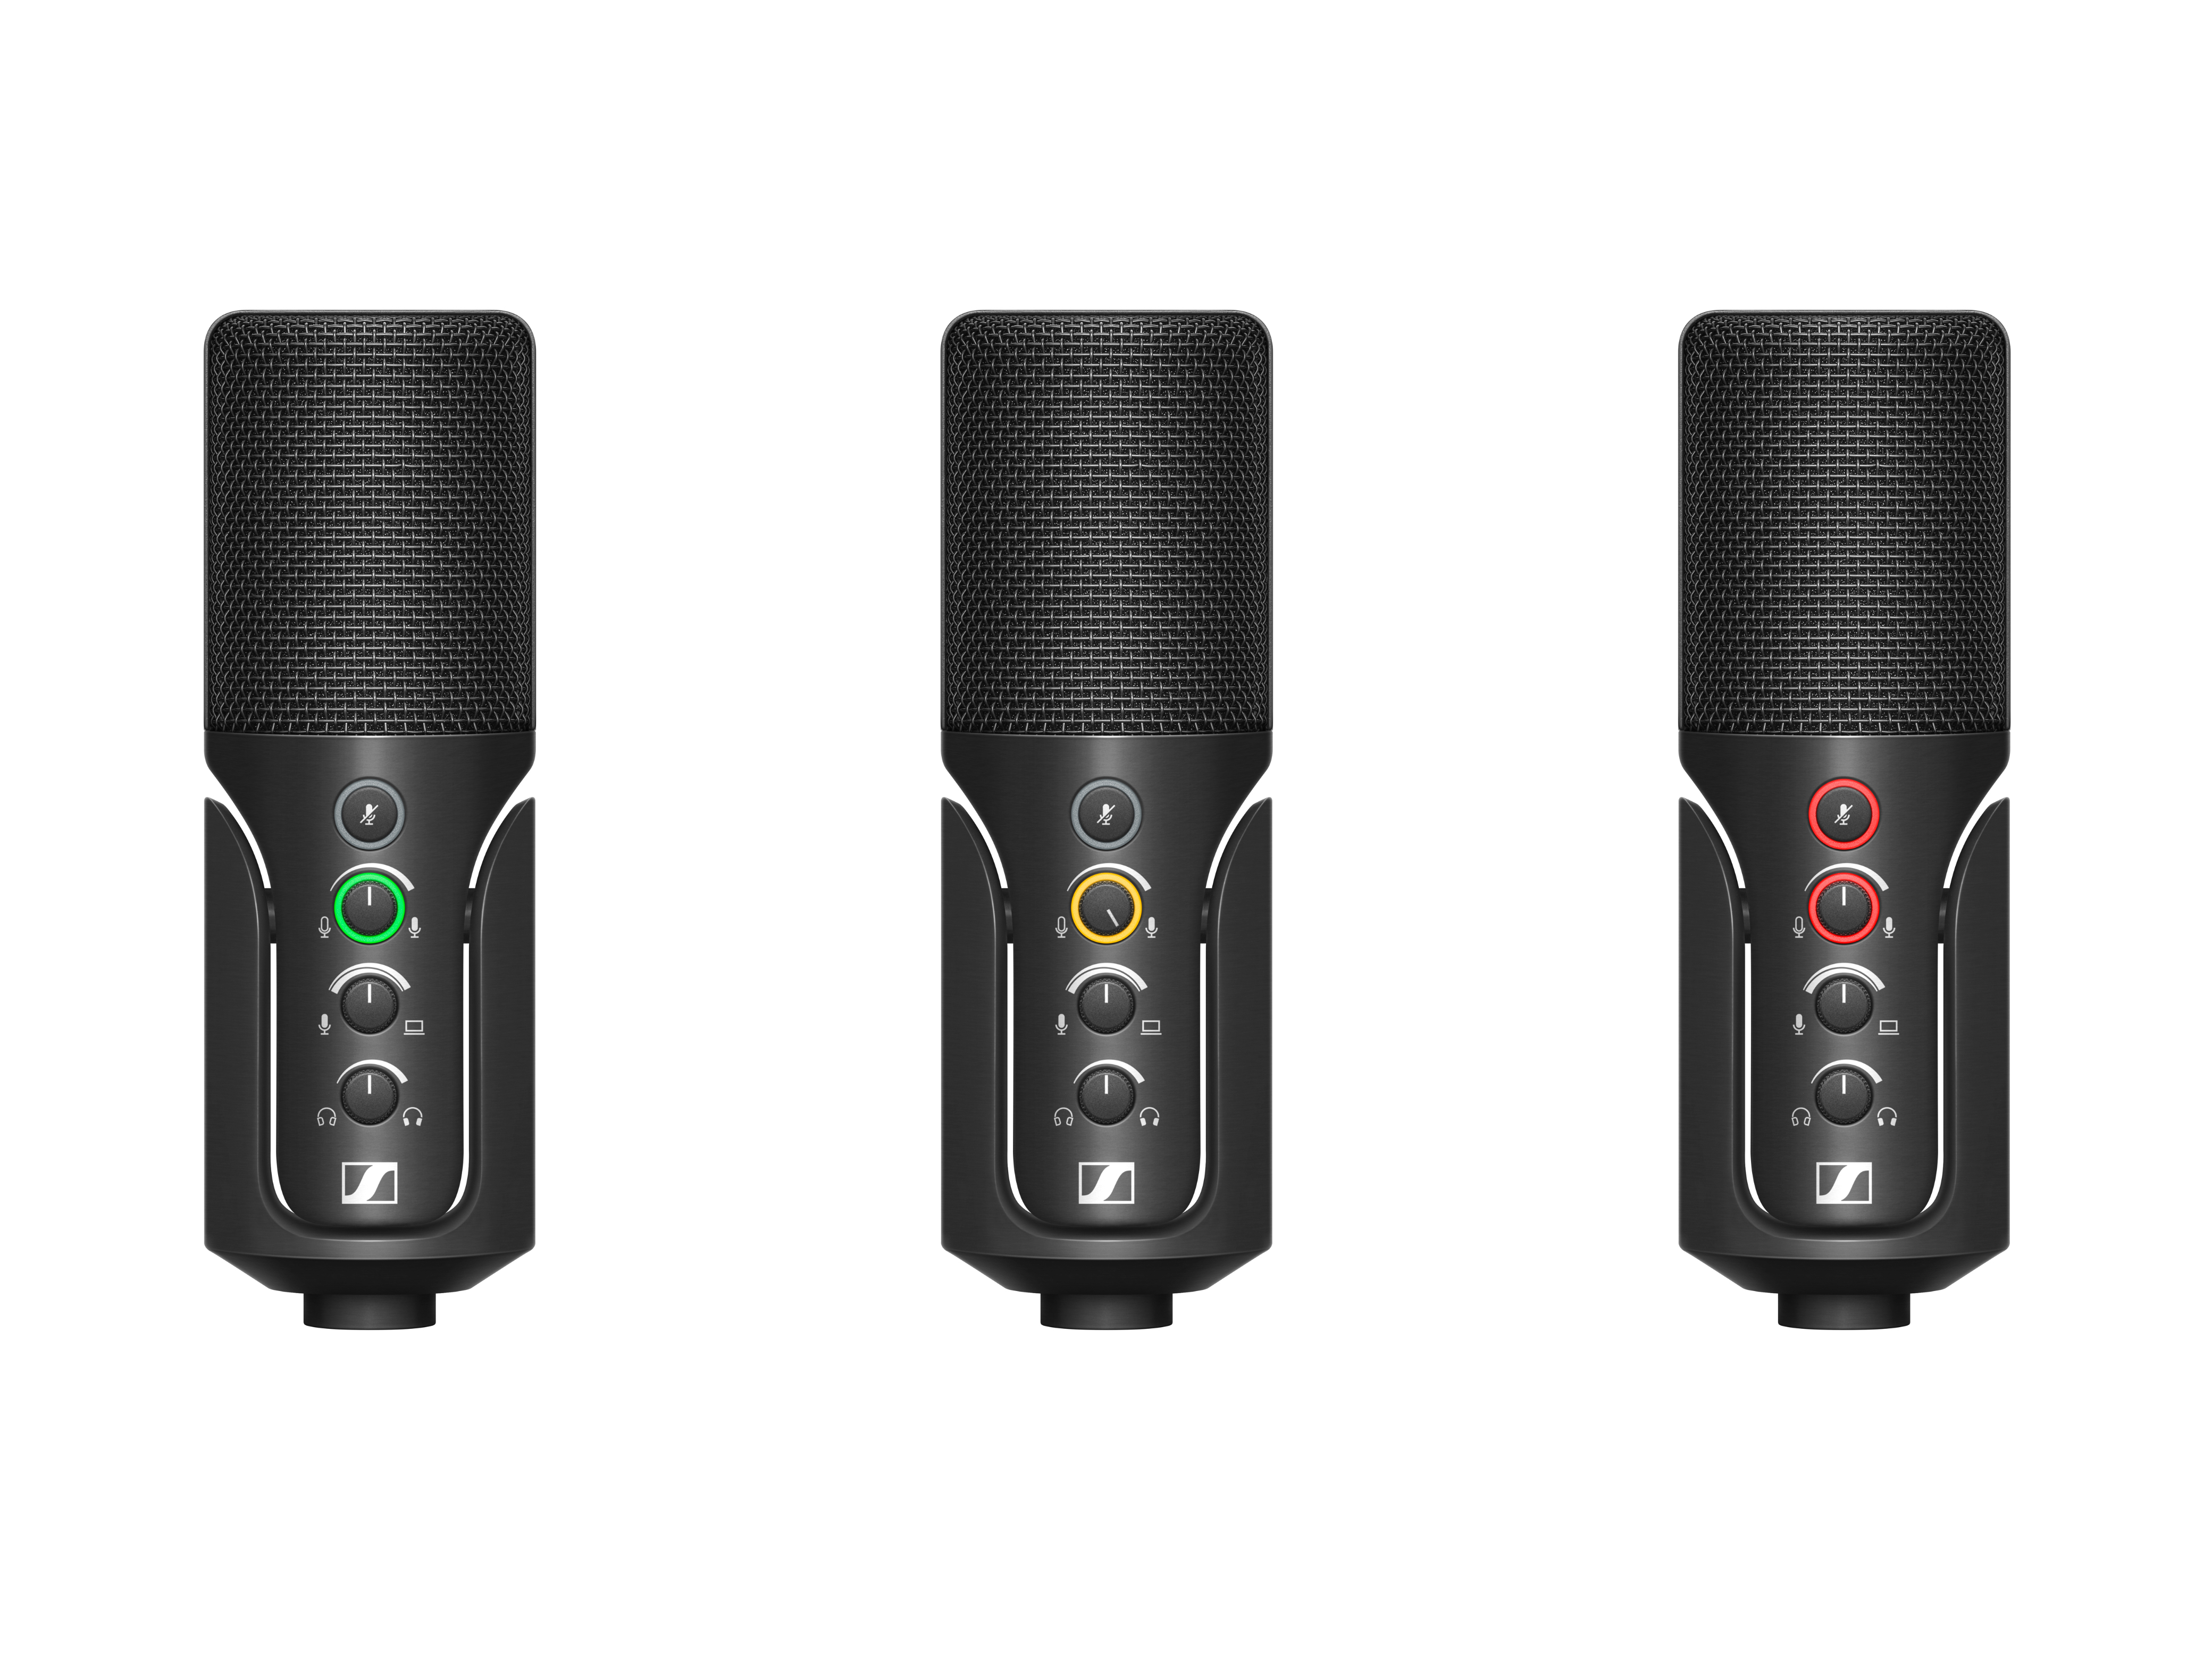 LED rings on the Profile USB microphone immediately show users the operating status